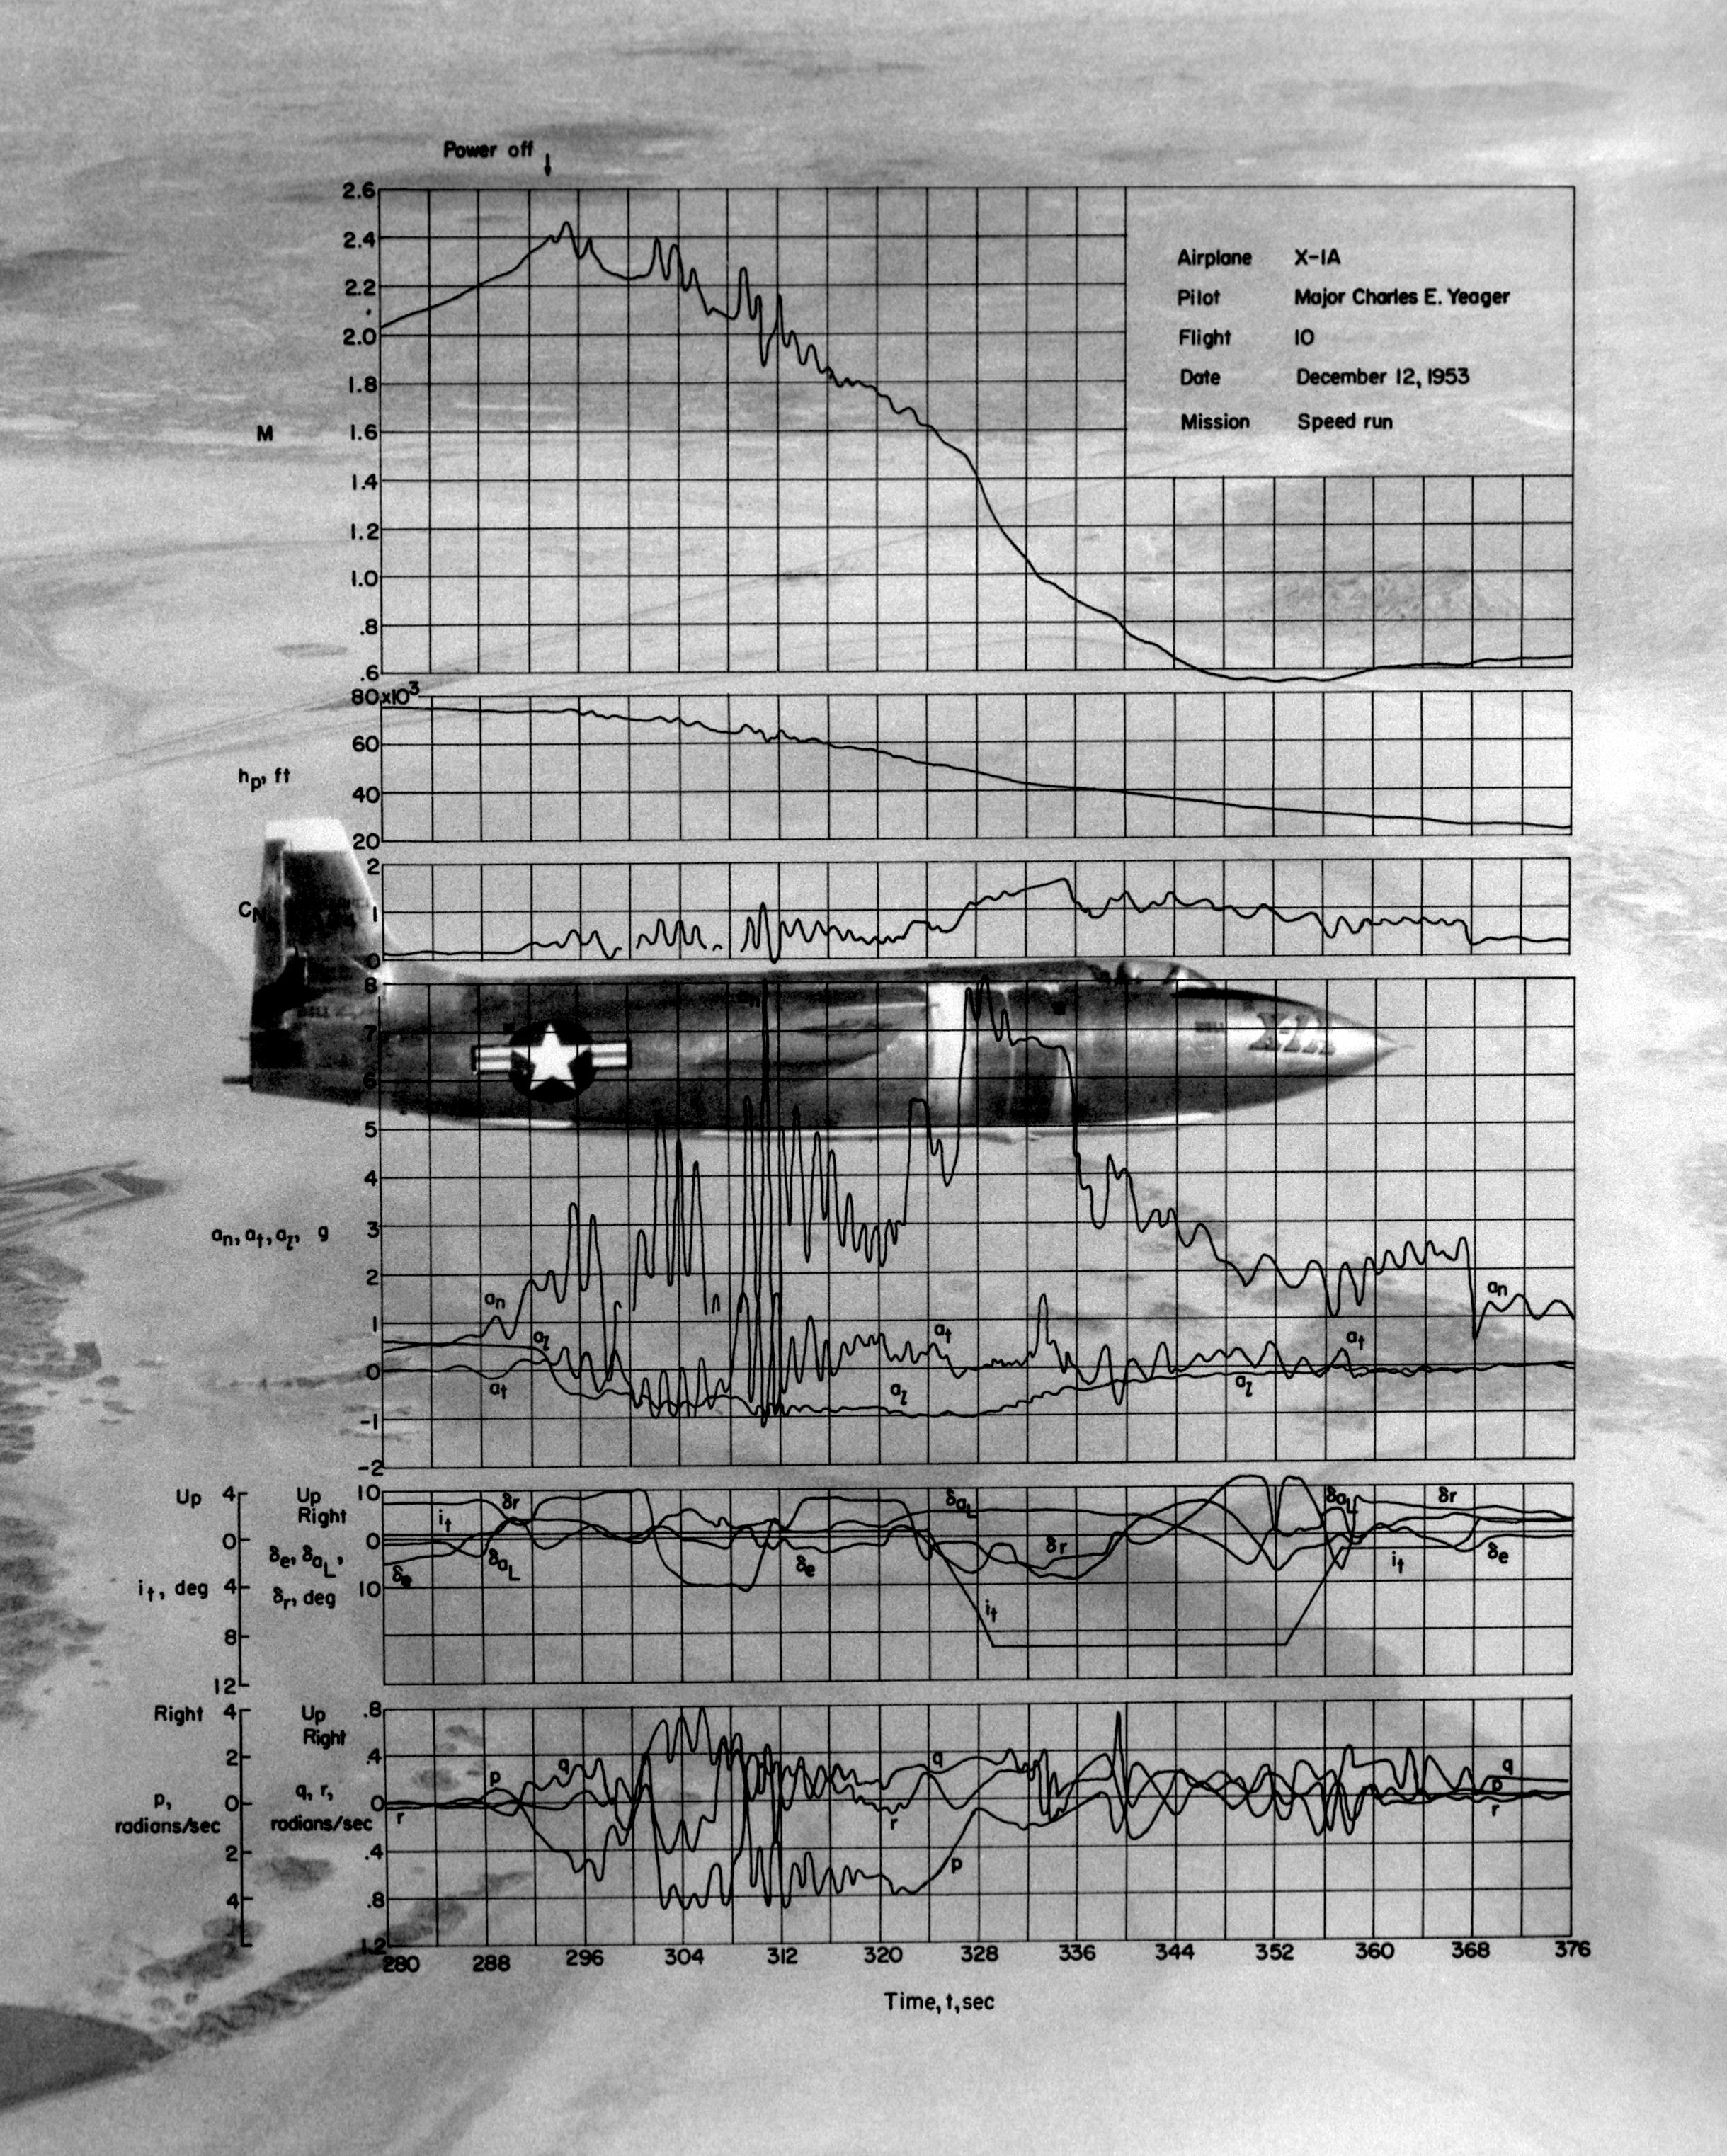 Flight test data from Yeager's 12 December 1953 flight superimposed over a photograph of the bell X-1A. (NASA)